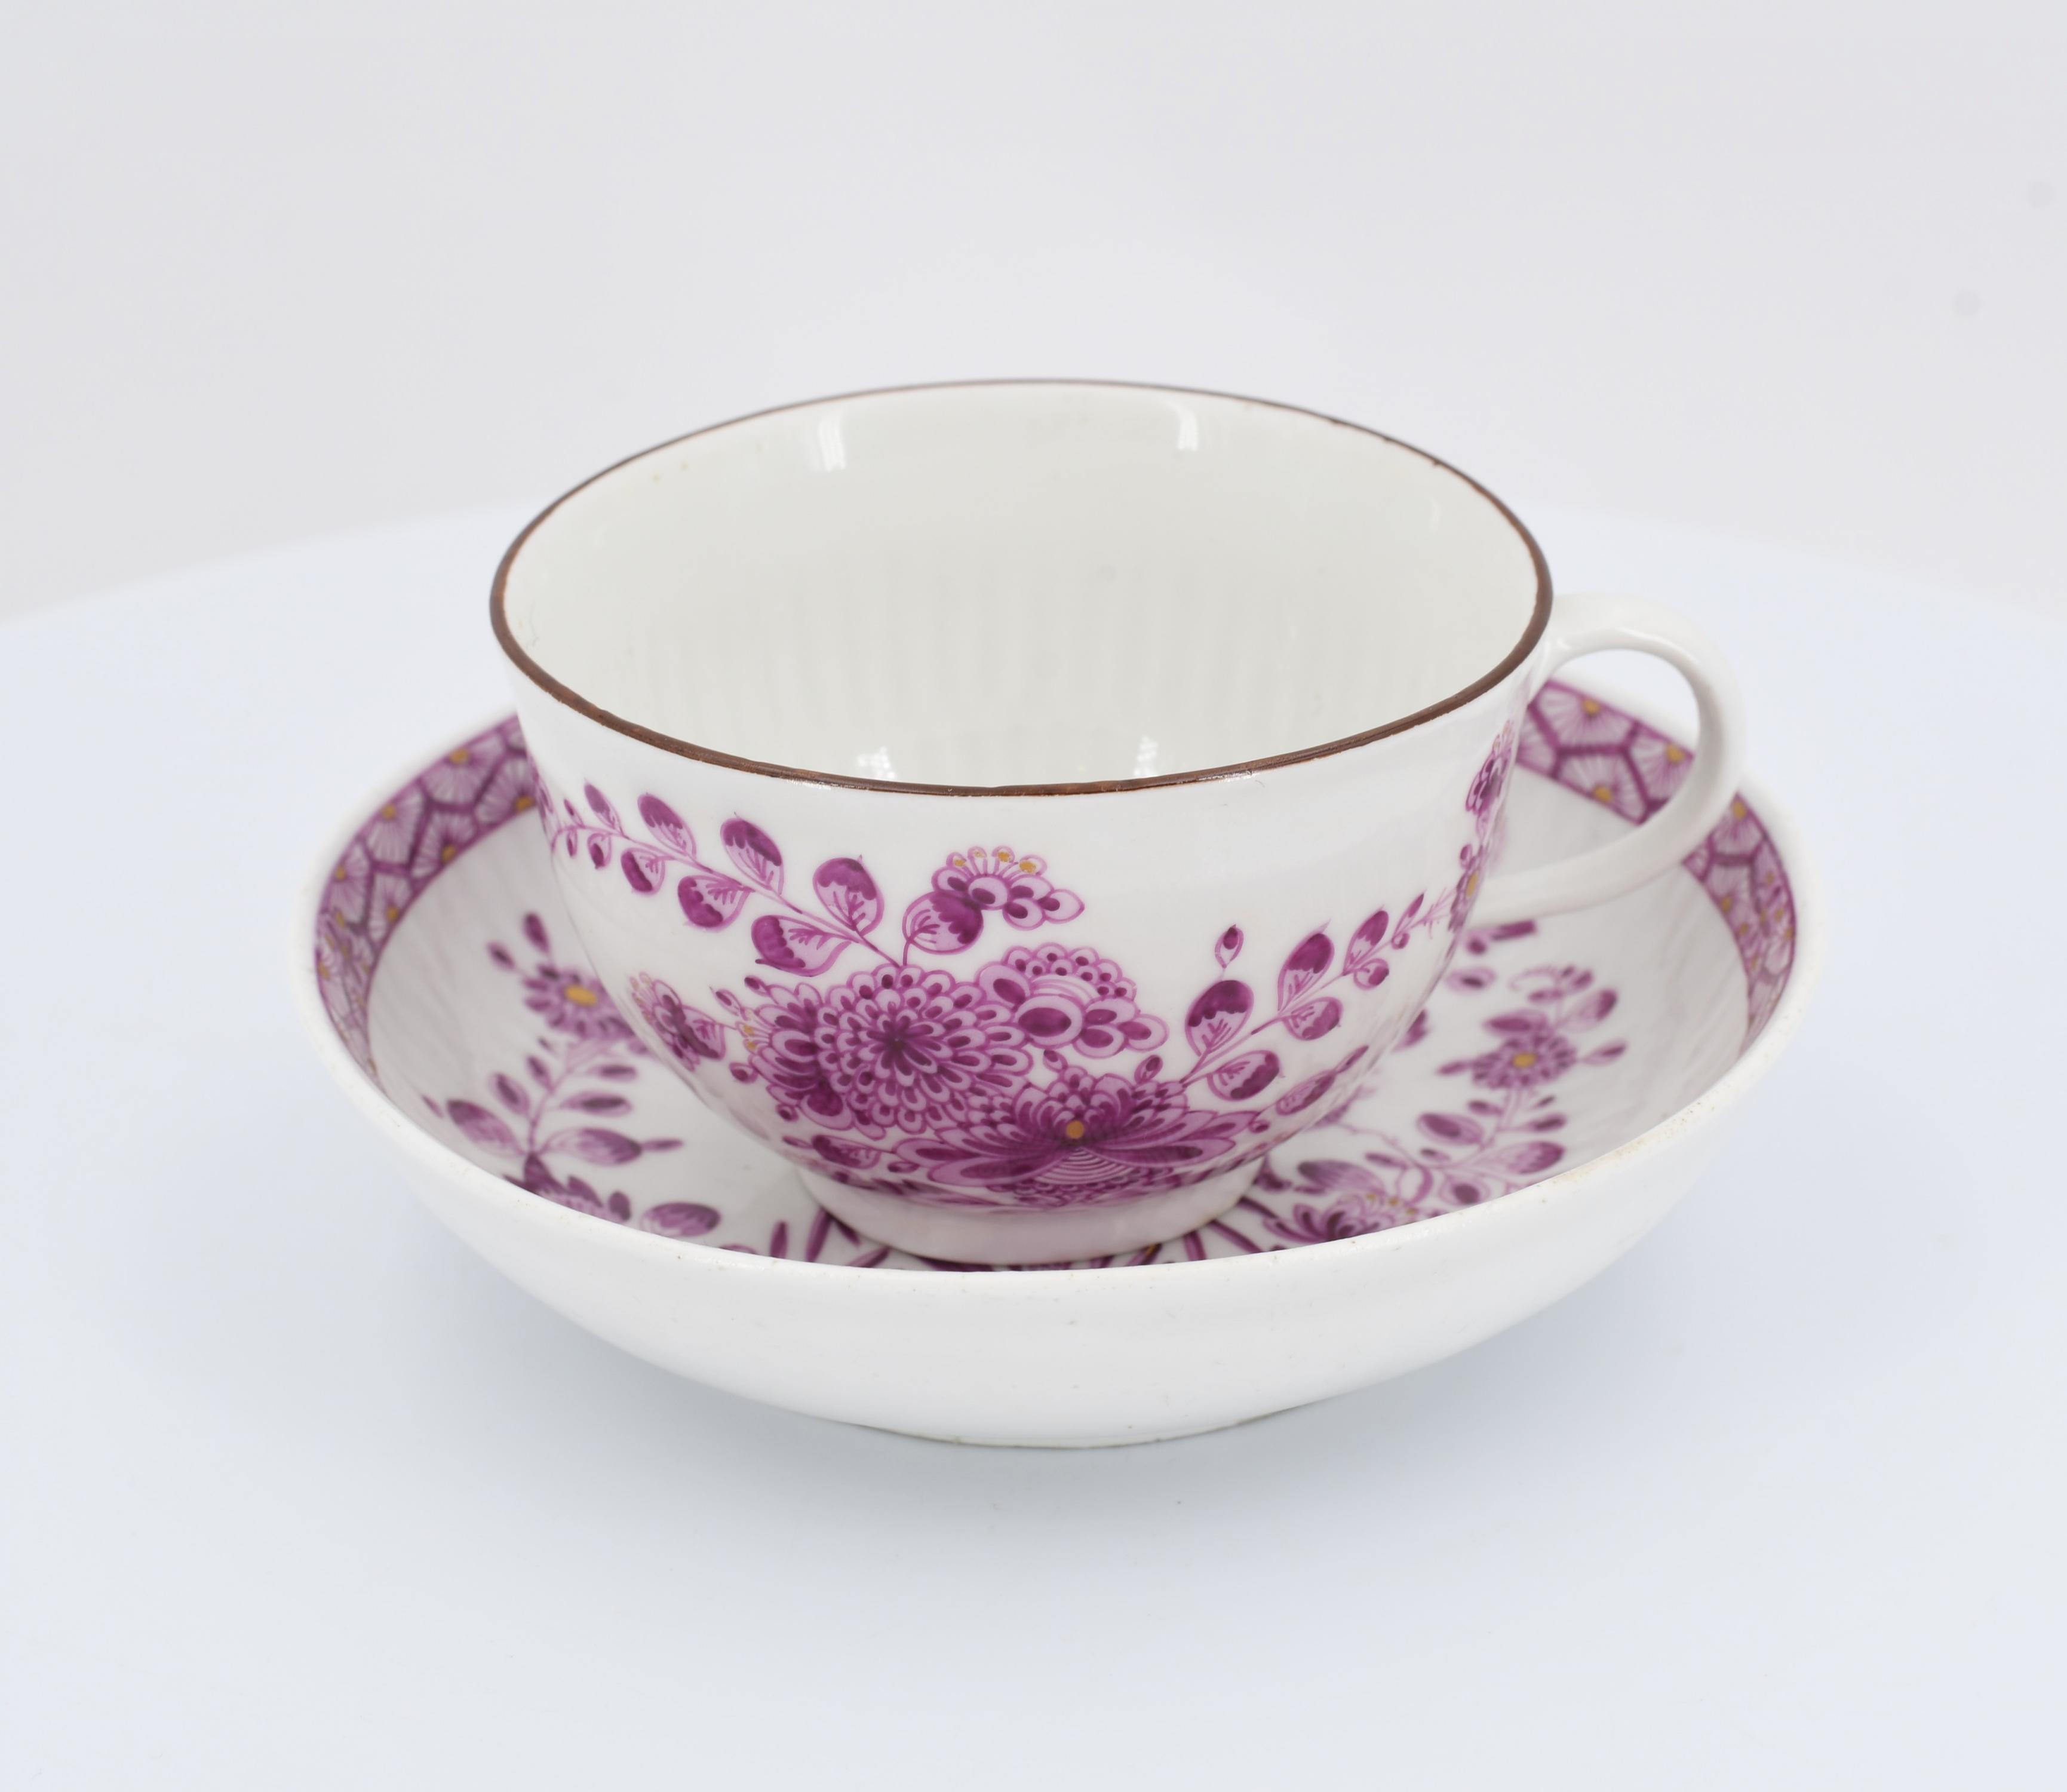 Two cups and saucers with floral décor - Image 2 of 19